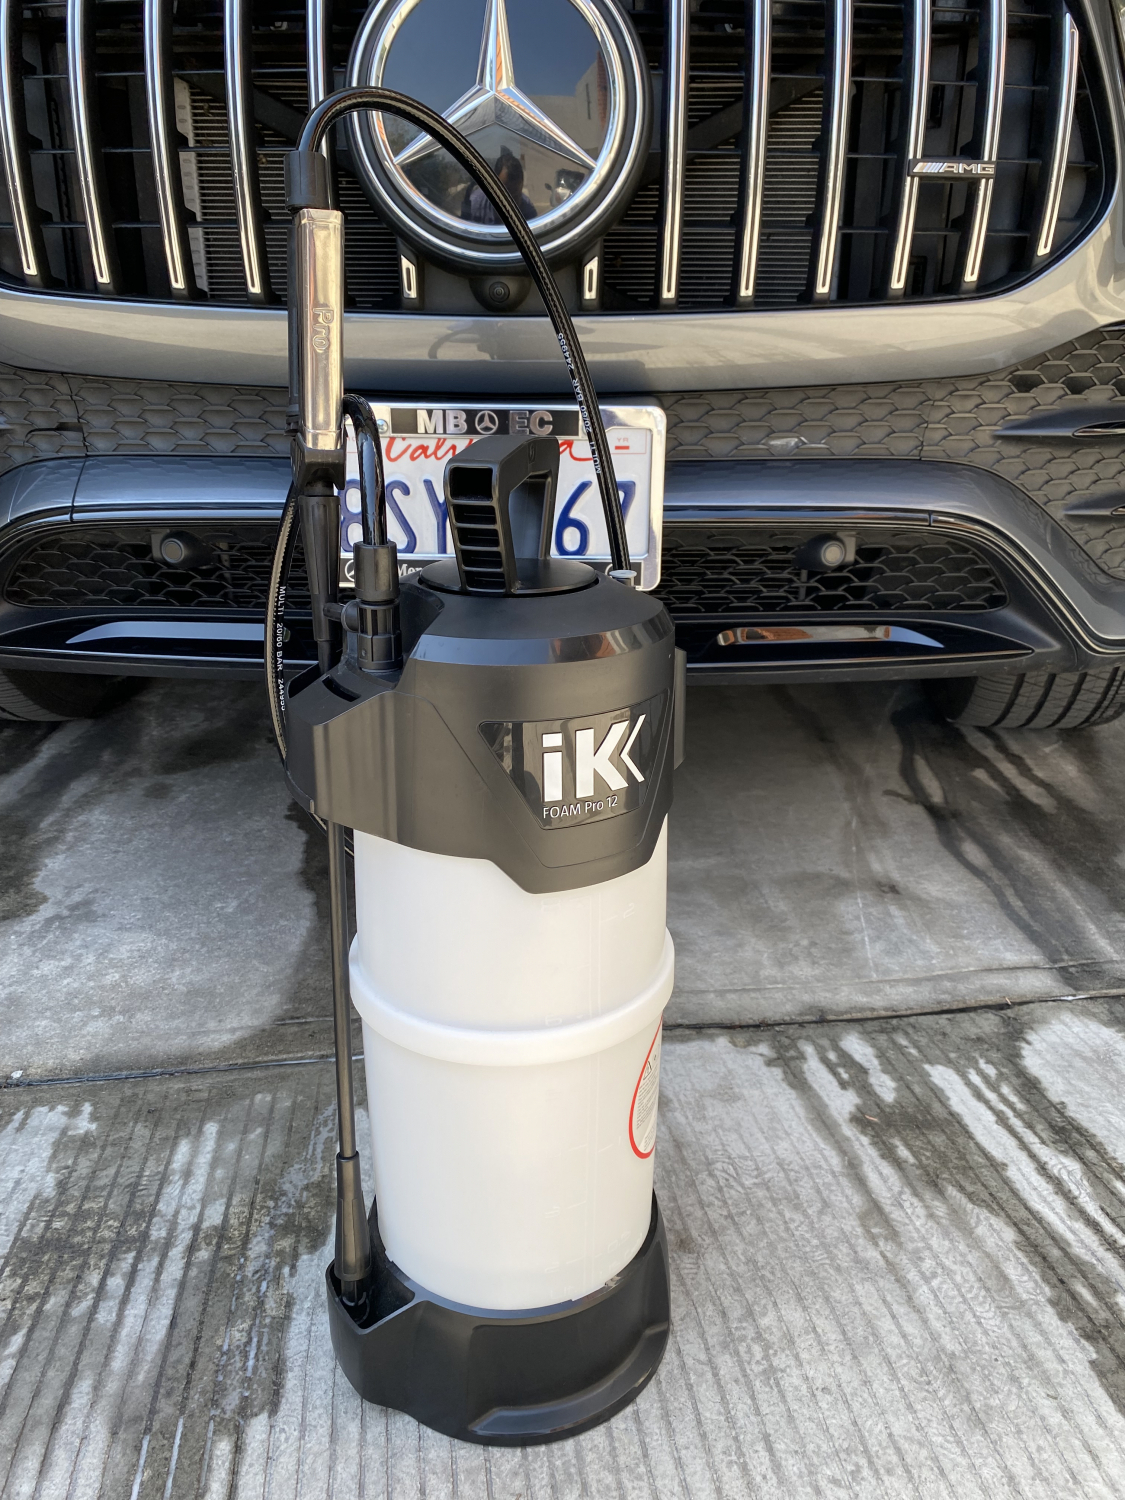 IK Foam Pro12 Sprayer Review This is an AWESOME tool